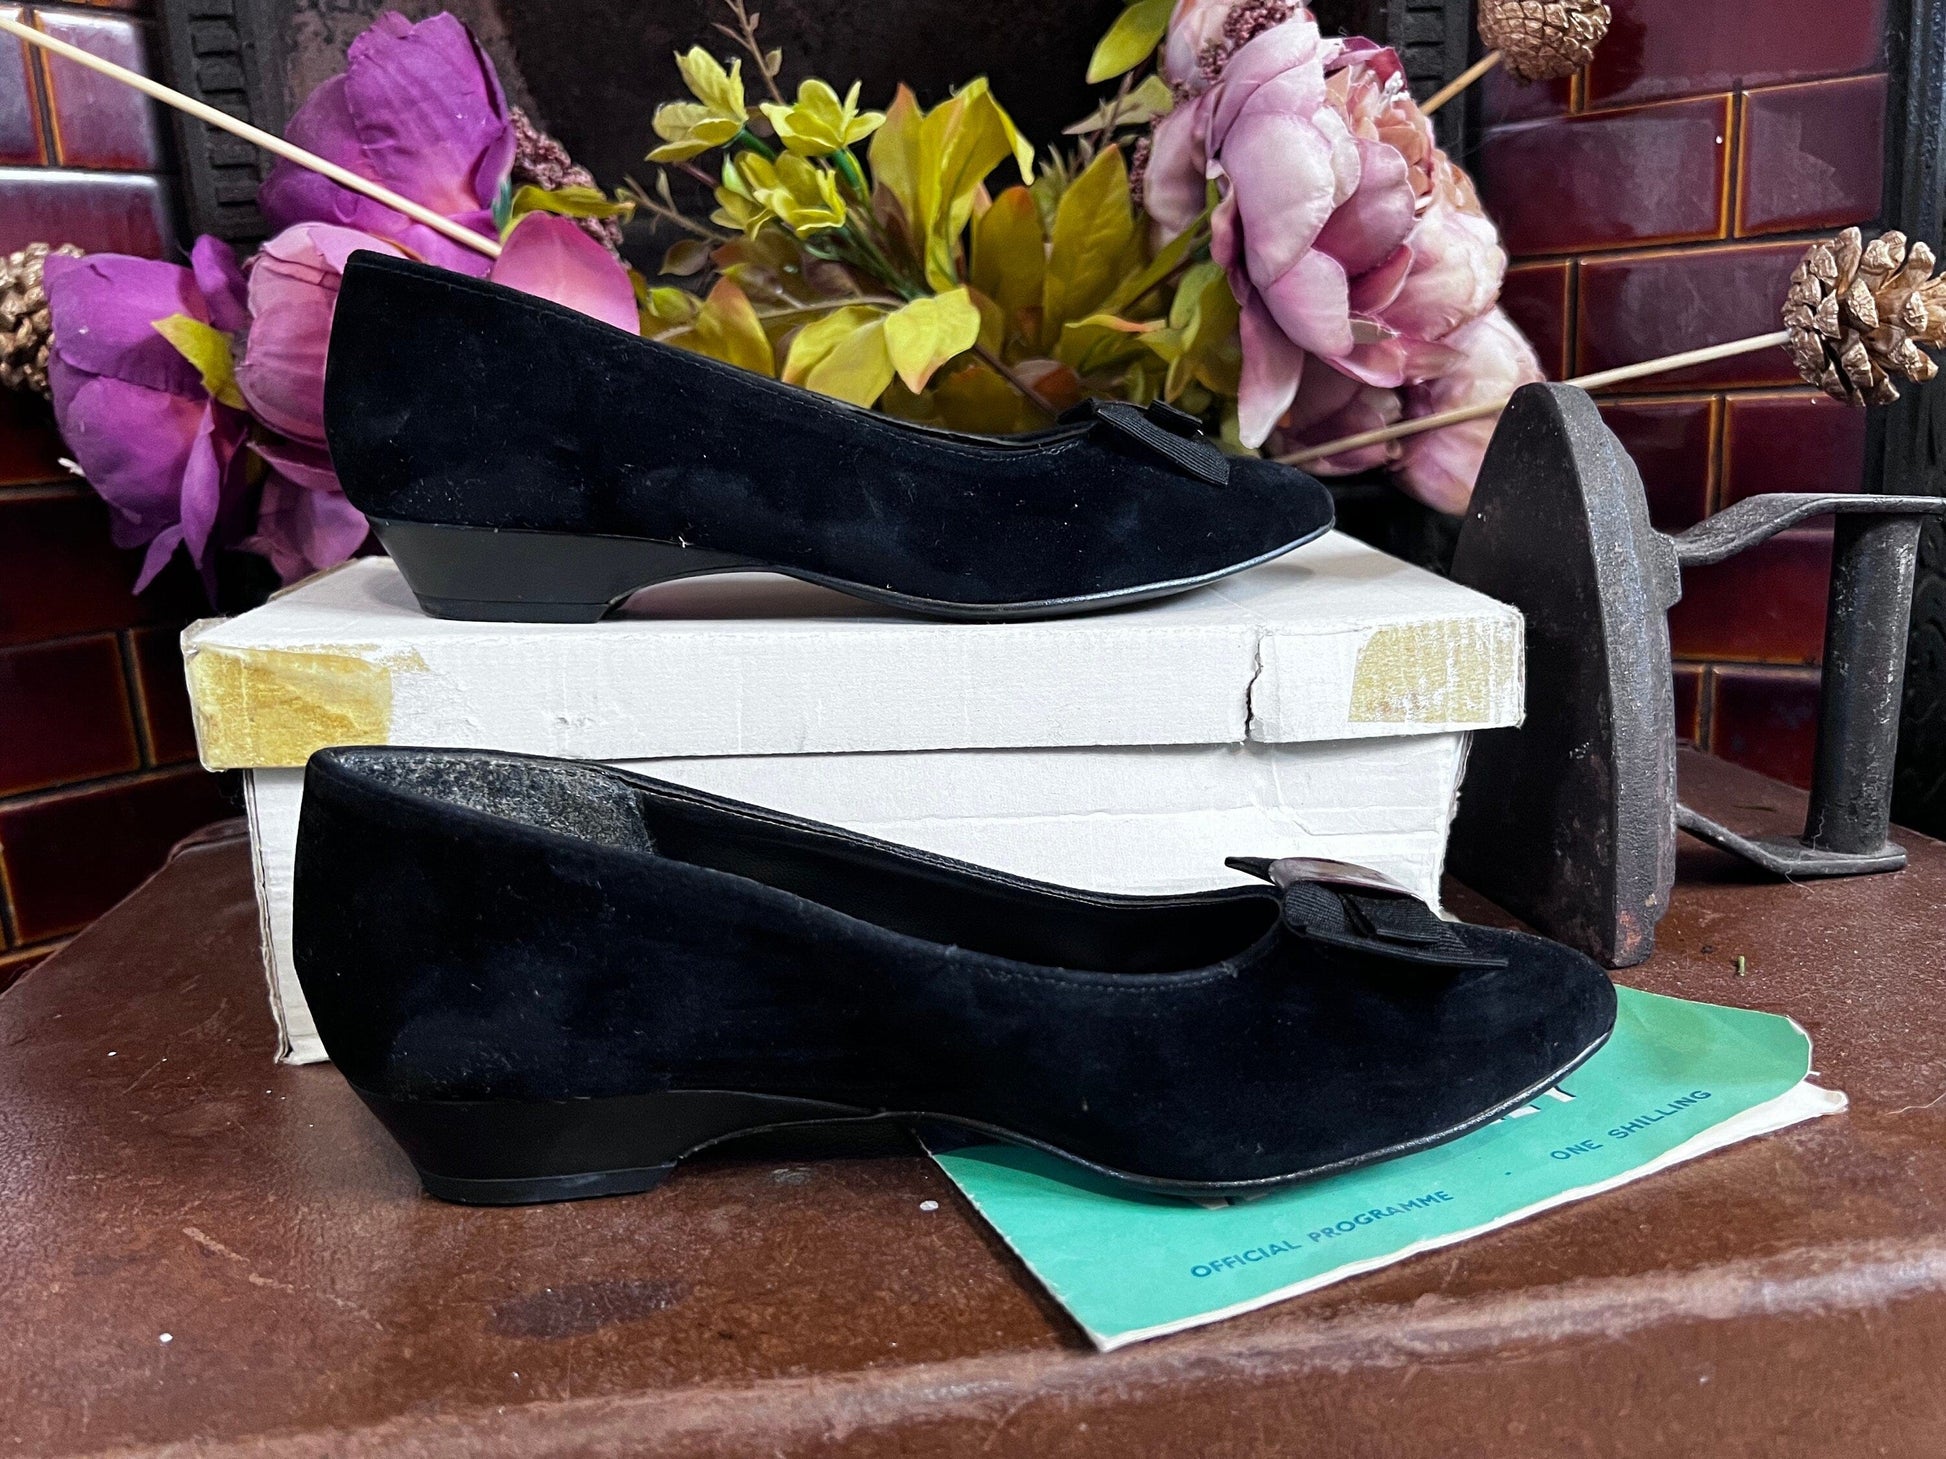 70s Black Shoes leather Pointed Shoes Black velvet, Vintage flats, Vintage Shoes, 70s Shoes, vintage shoes & box UK2 Vintage Italian shoes,